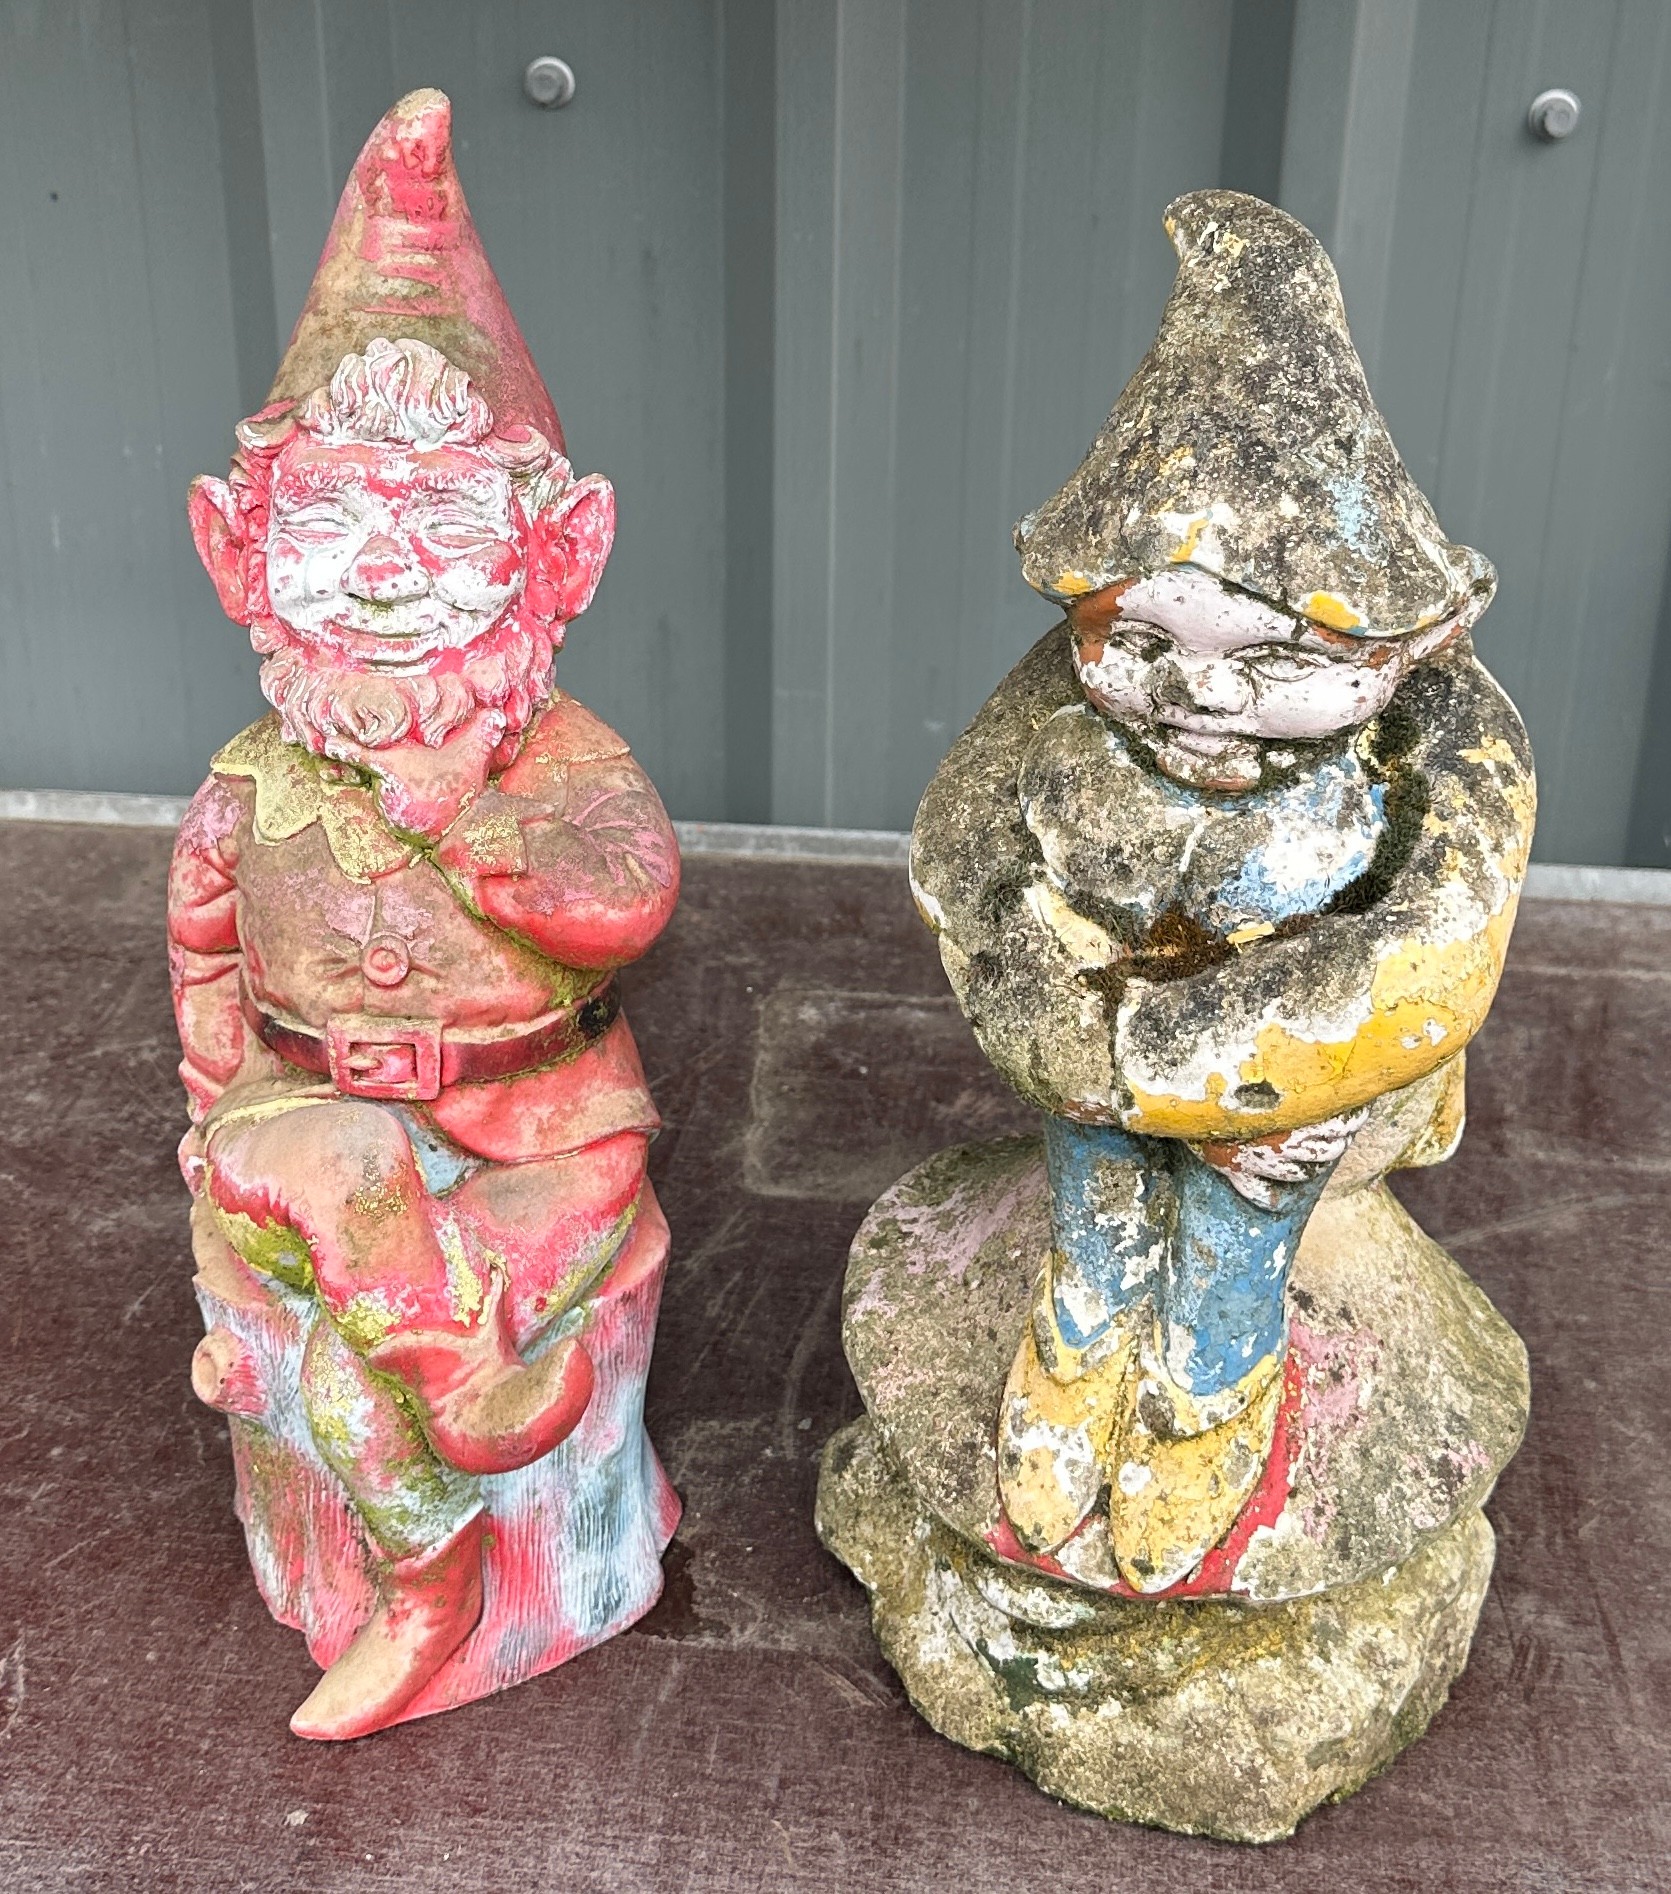 Two garden gnomes overall height of largest 15 inches tall